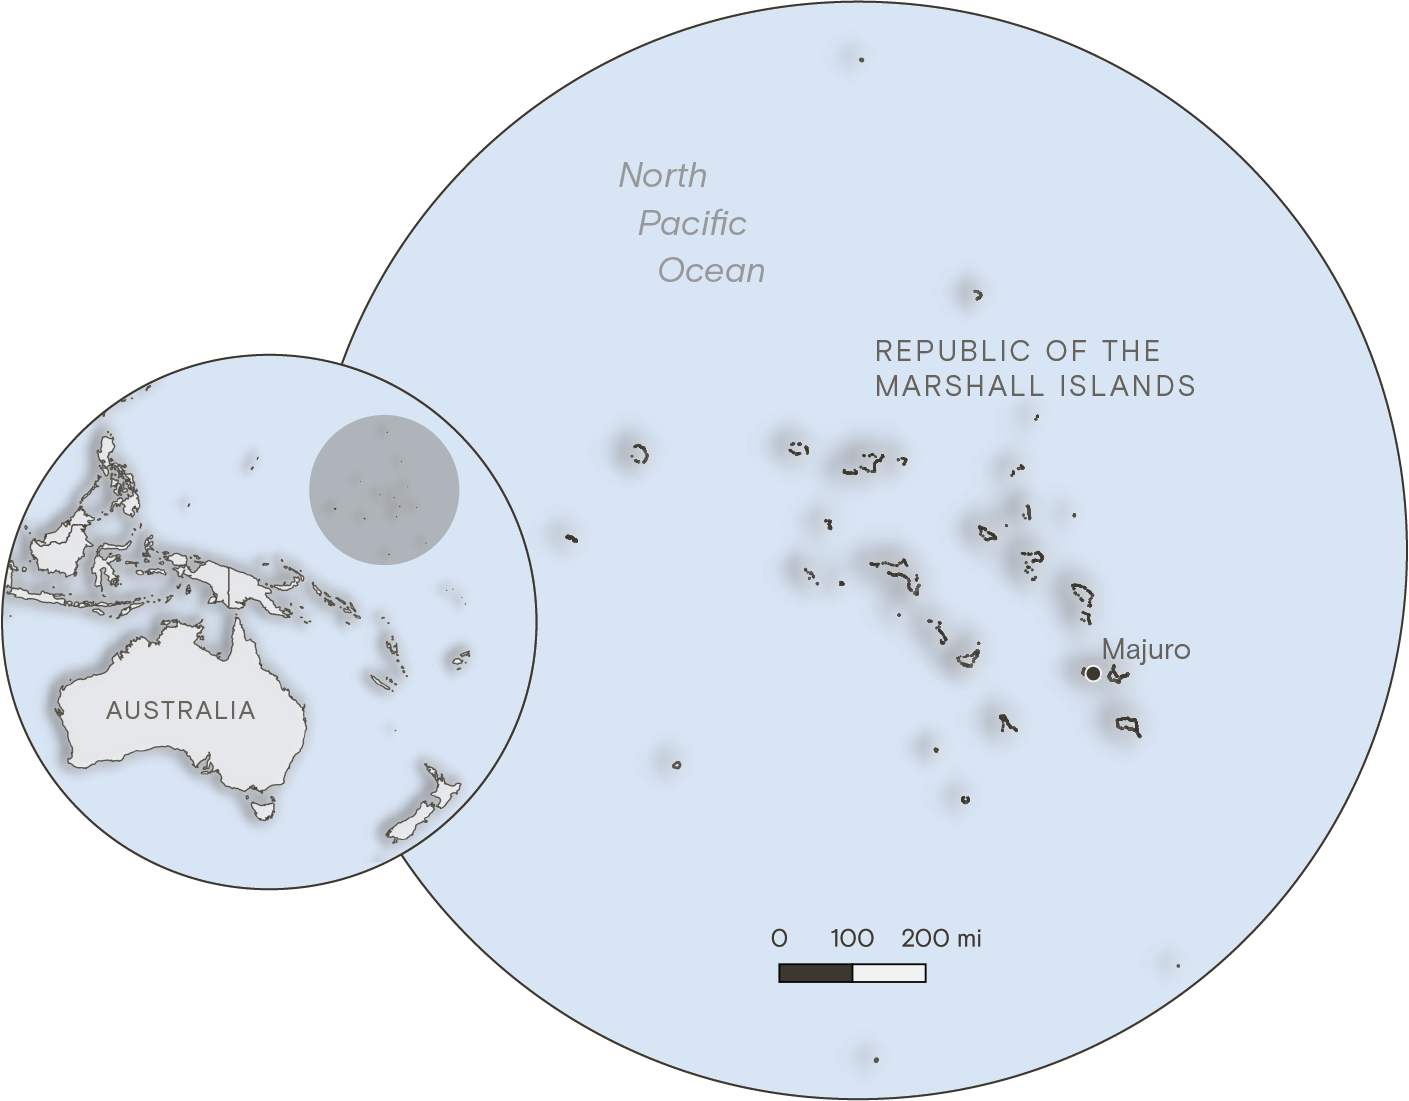 A locator map showing the Republic of the Marshall Islands. The archipelago of atolls appears northeast of Australia in the North Pacific Ocean.